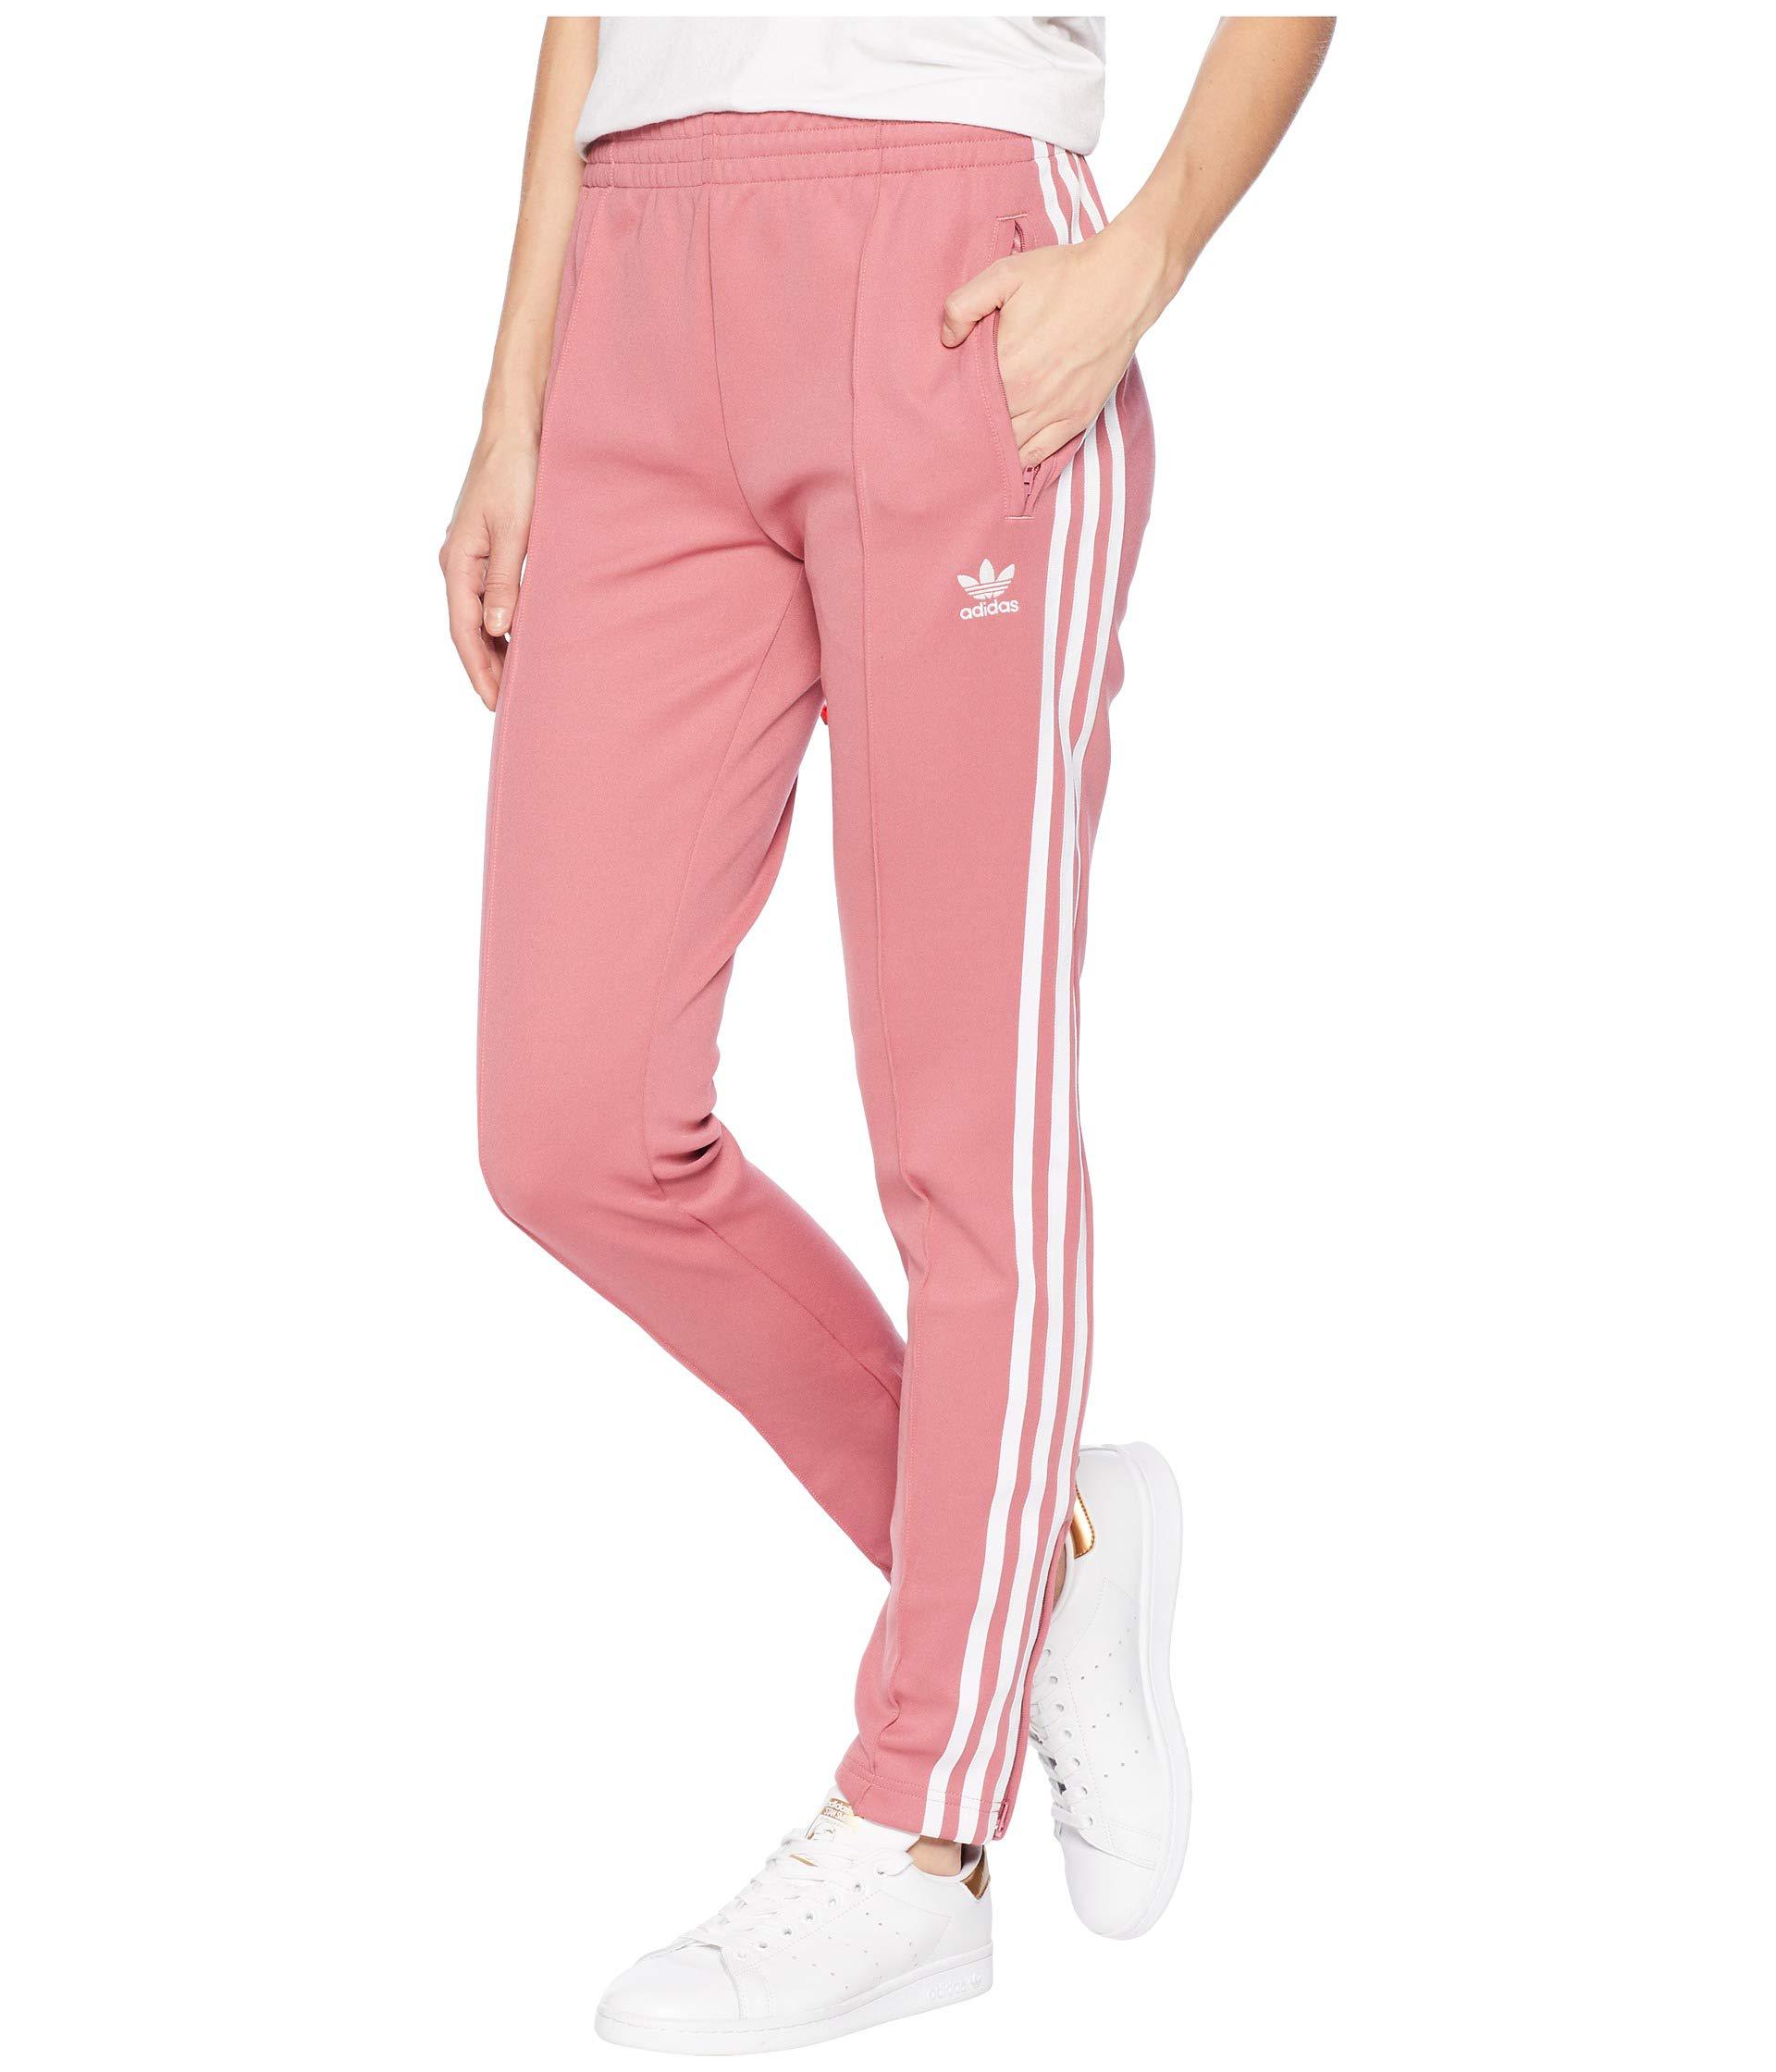 Lyst - adidas Originals Sst Track Pants (black) Women's Workout in Pink